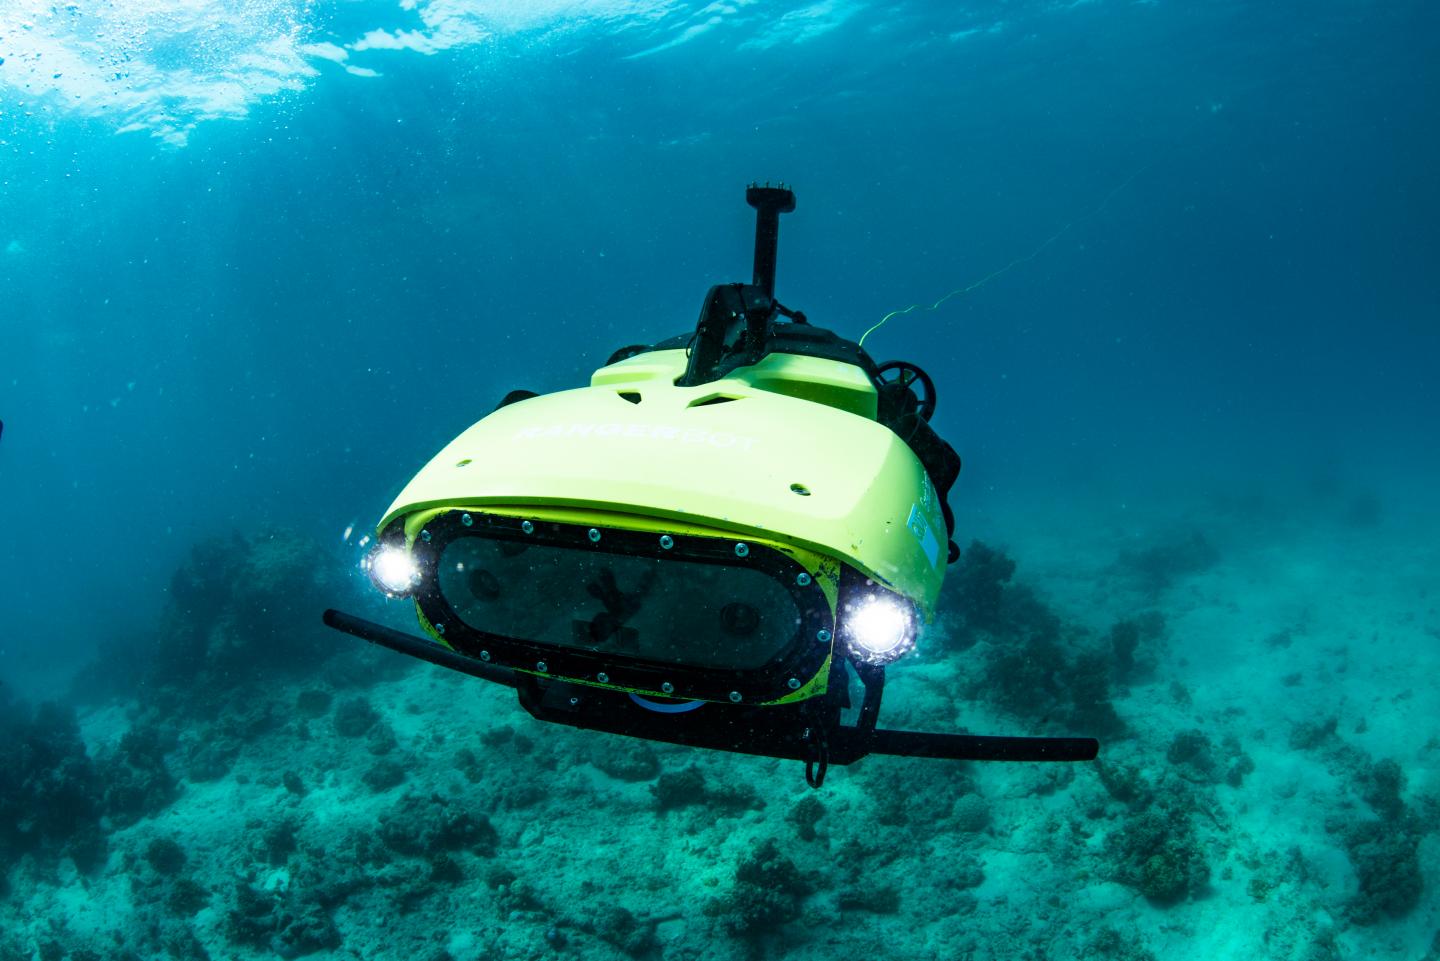 This robot plants heat-resistant corals to save endangered reefs